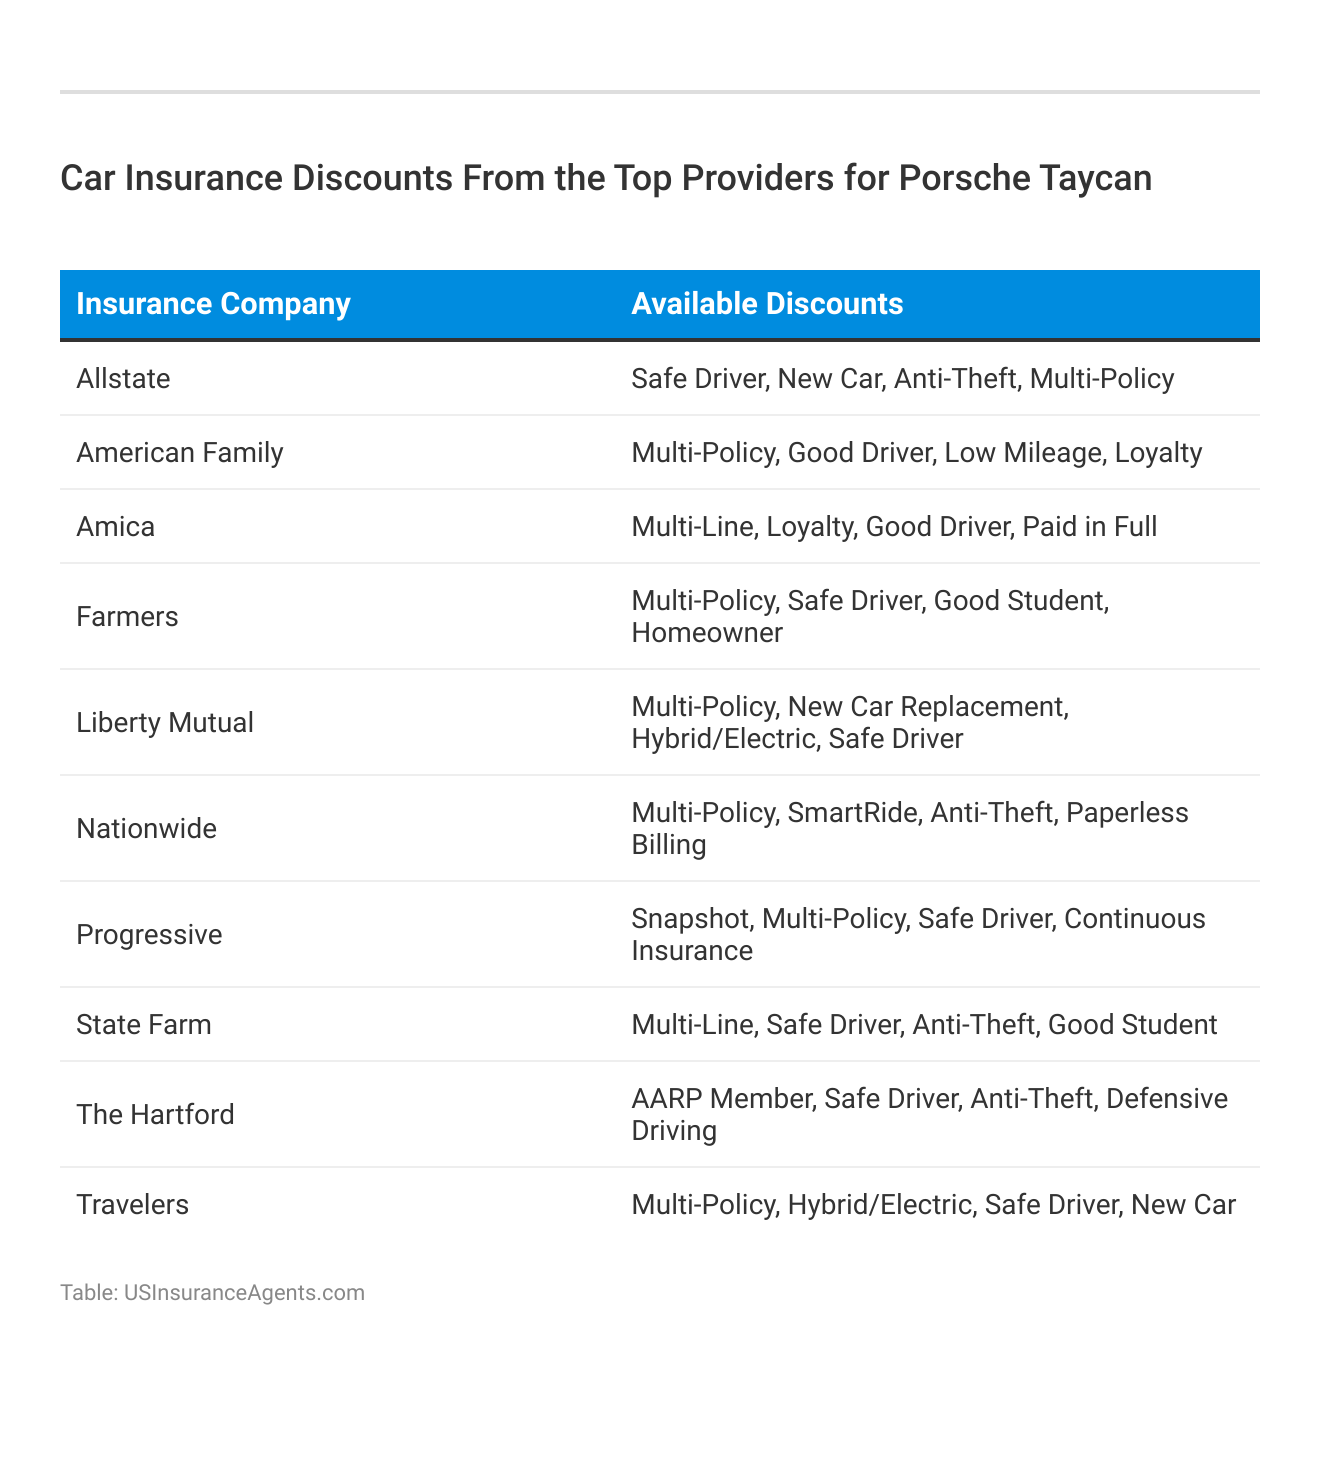 <h3>Car Insurance Discounts From the Top Providers for Porsche Taycan</h3>